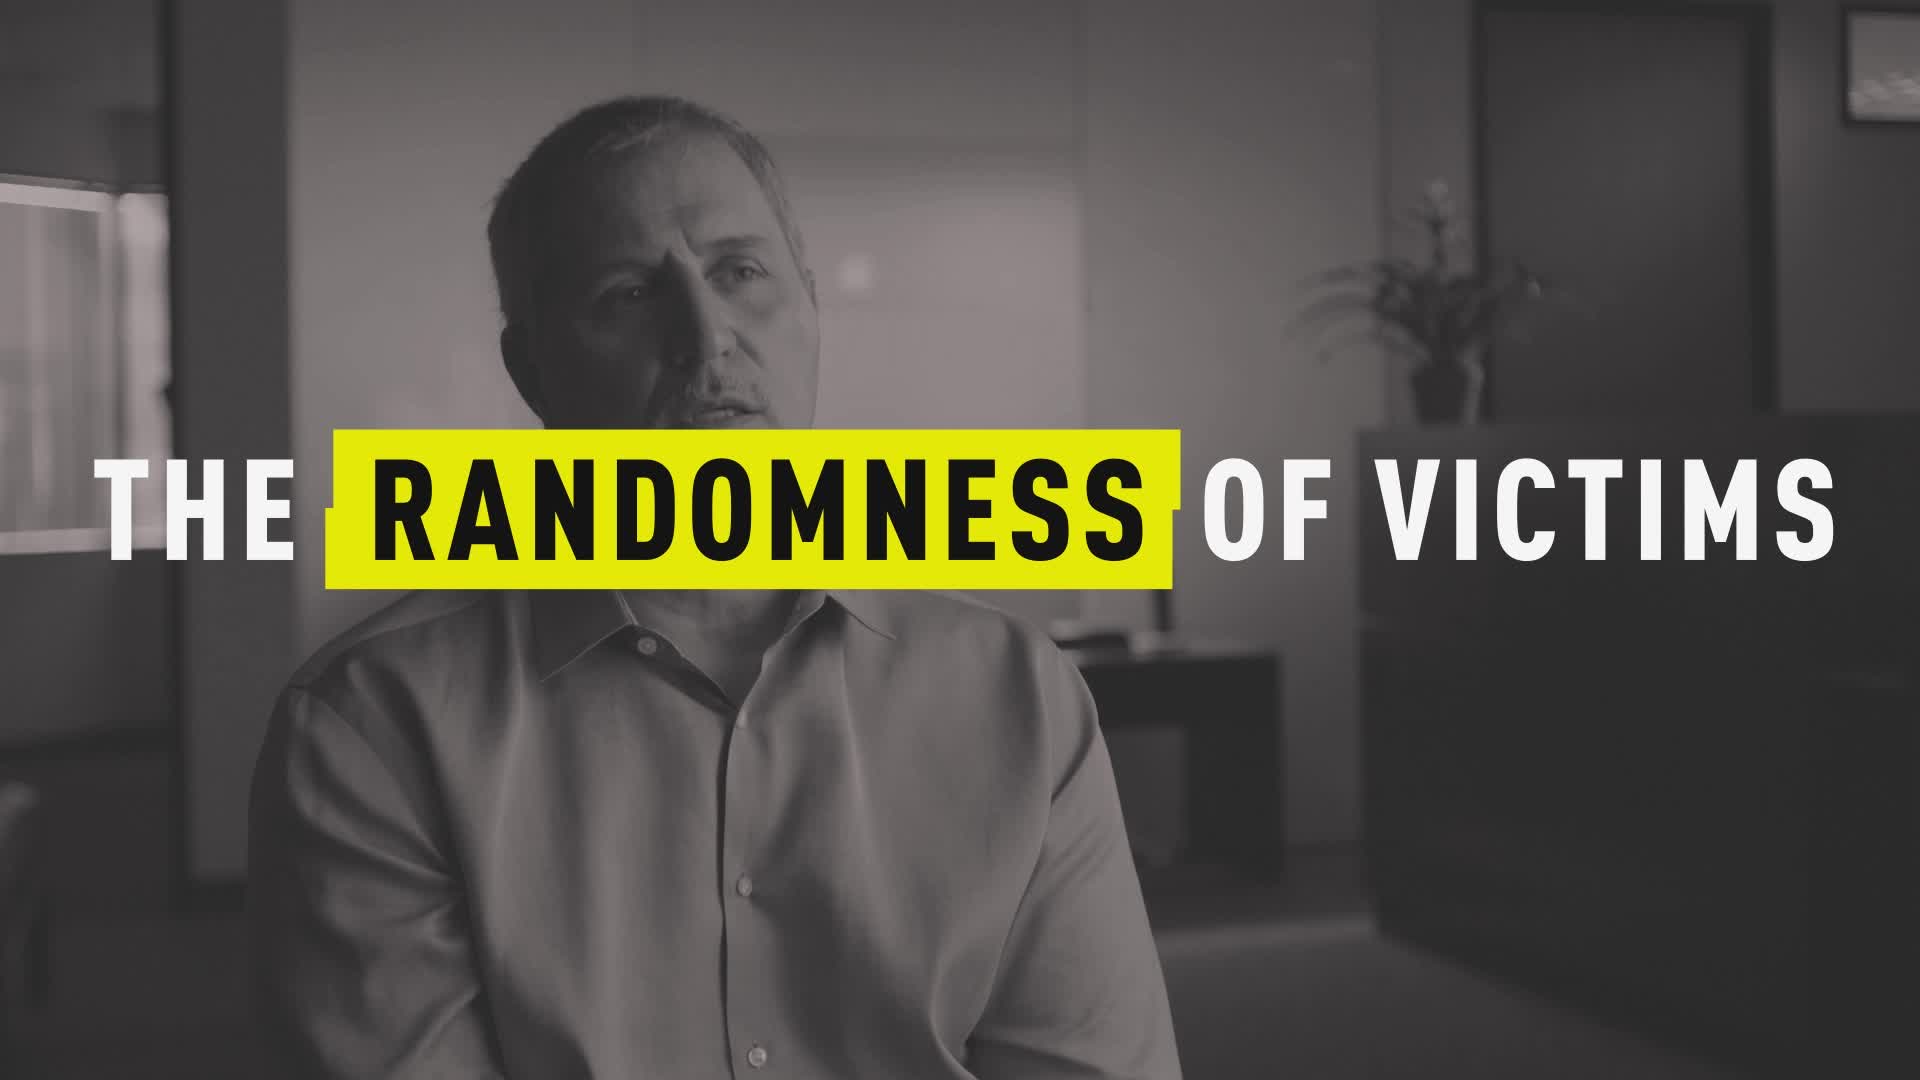 Method of a Serial Killer: The Randomness of Victims